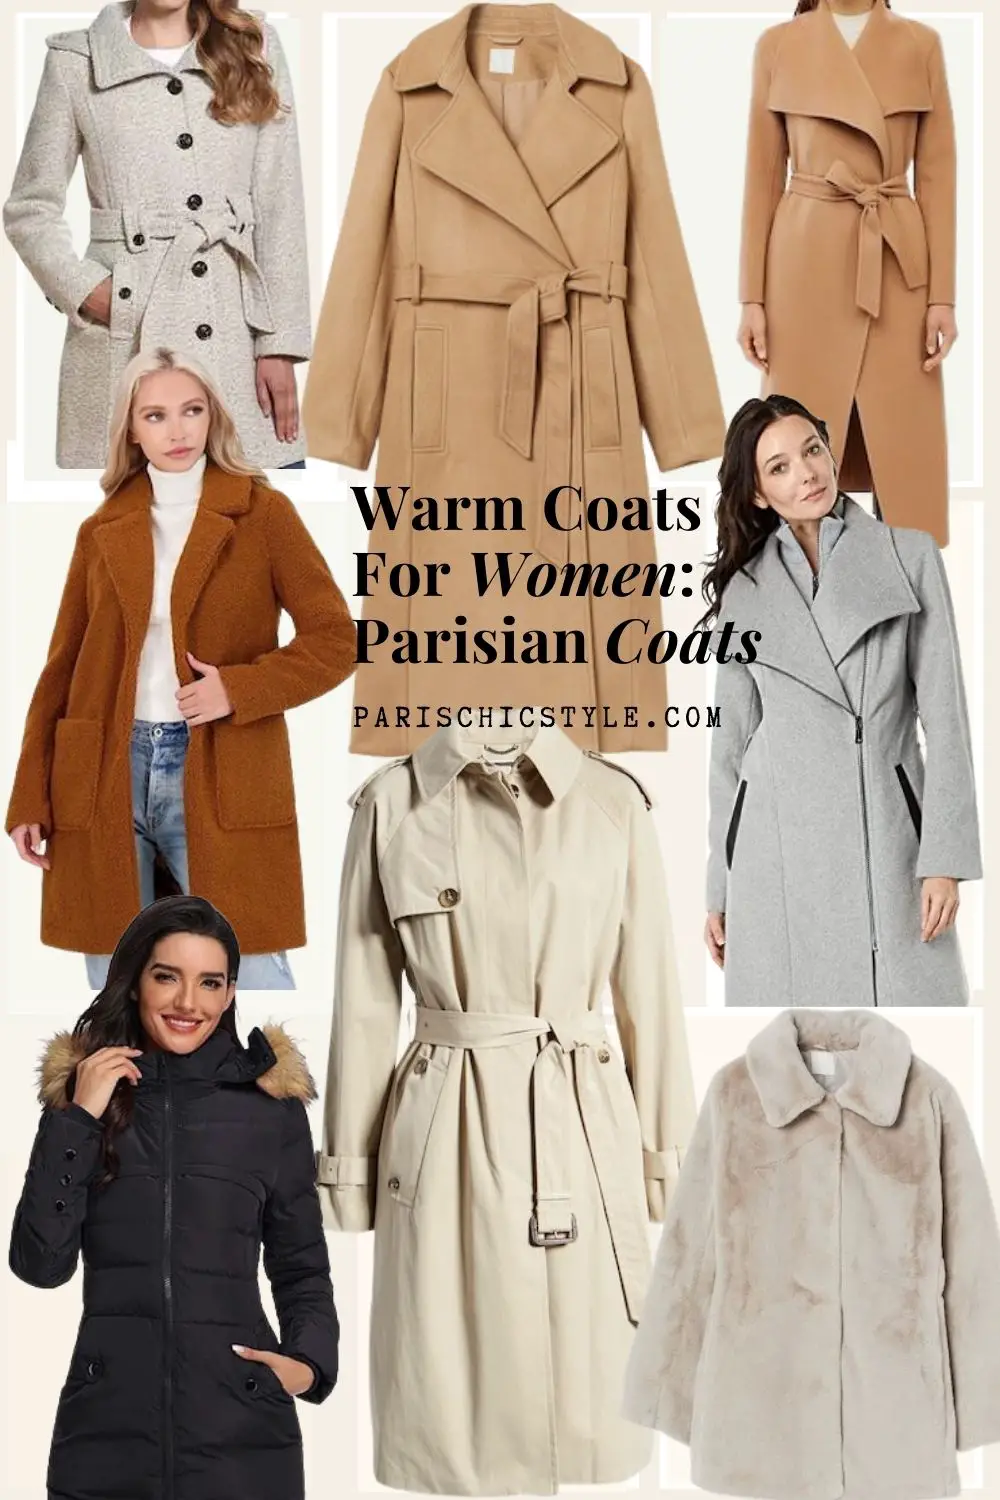 Best Coats For Women Travel Sightseeing Streetstyle Walking Work Weddings Paris Chic Style Trench Coats Peacoats Faux Fur Teddy Coats Puffer (1)